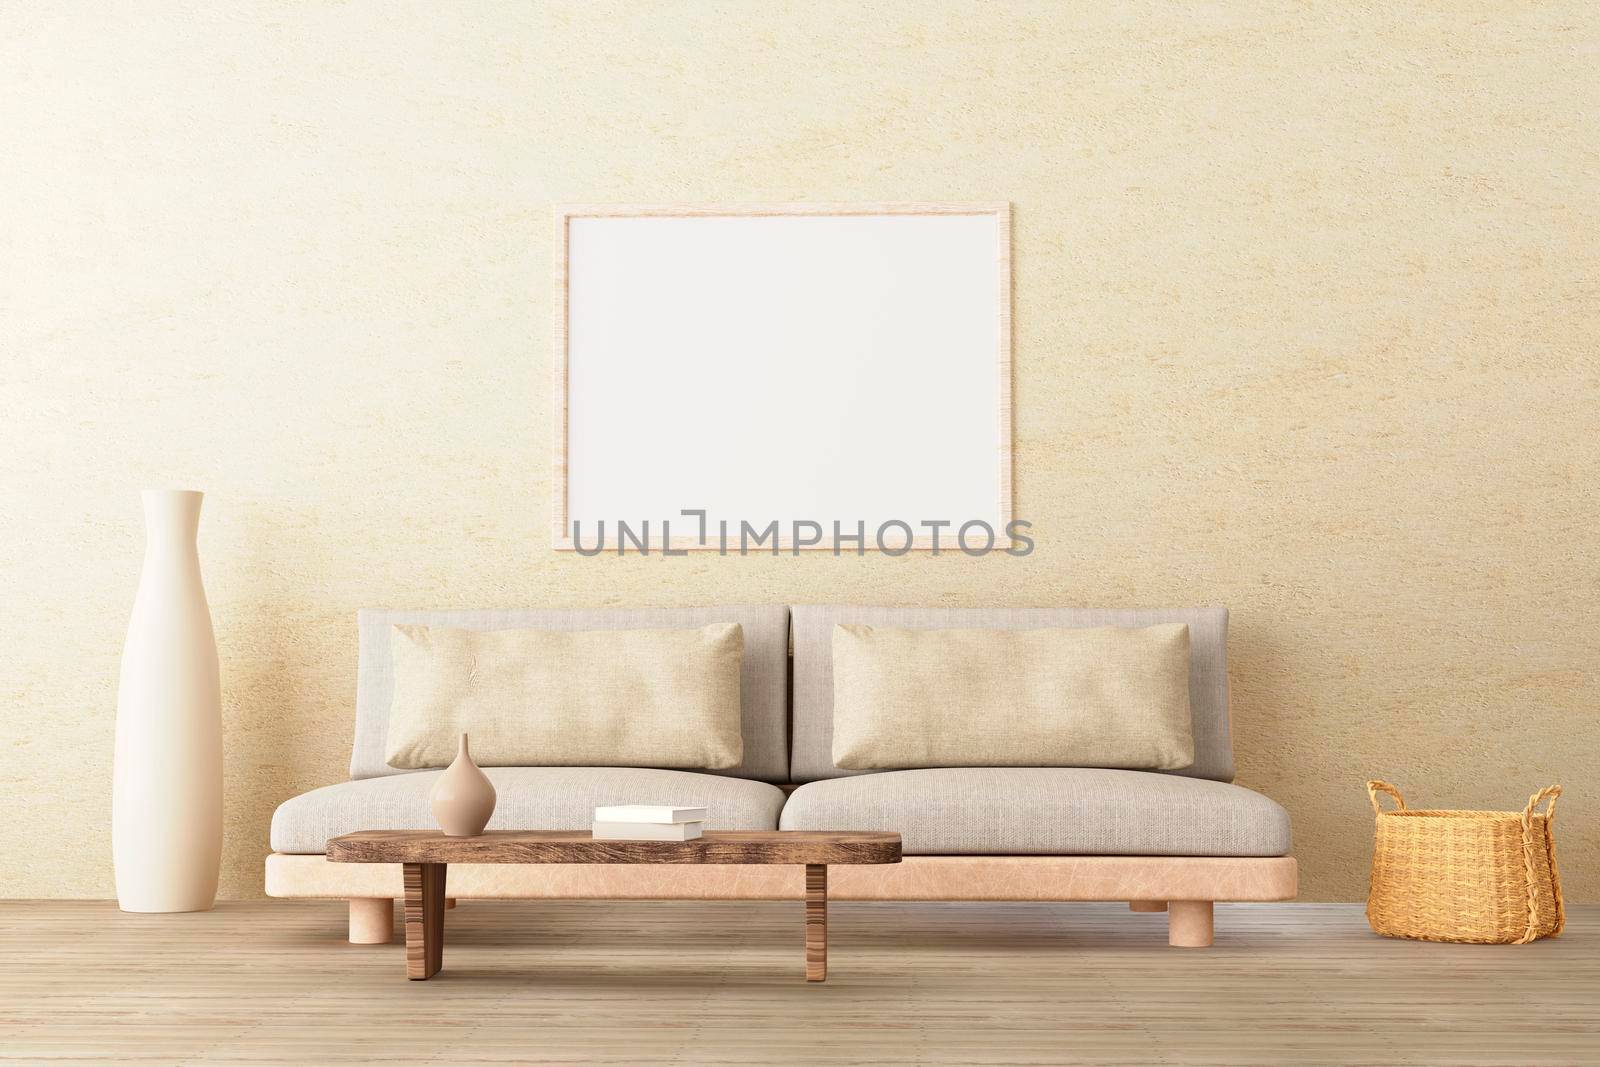 Vertical poster mockup in neutral style interior living room with low sofa, ceramic jug, side table, wicker basket and books on empty concrete wall background. 3d render.